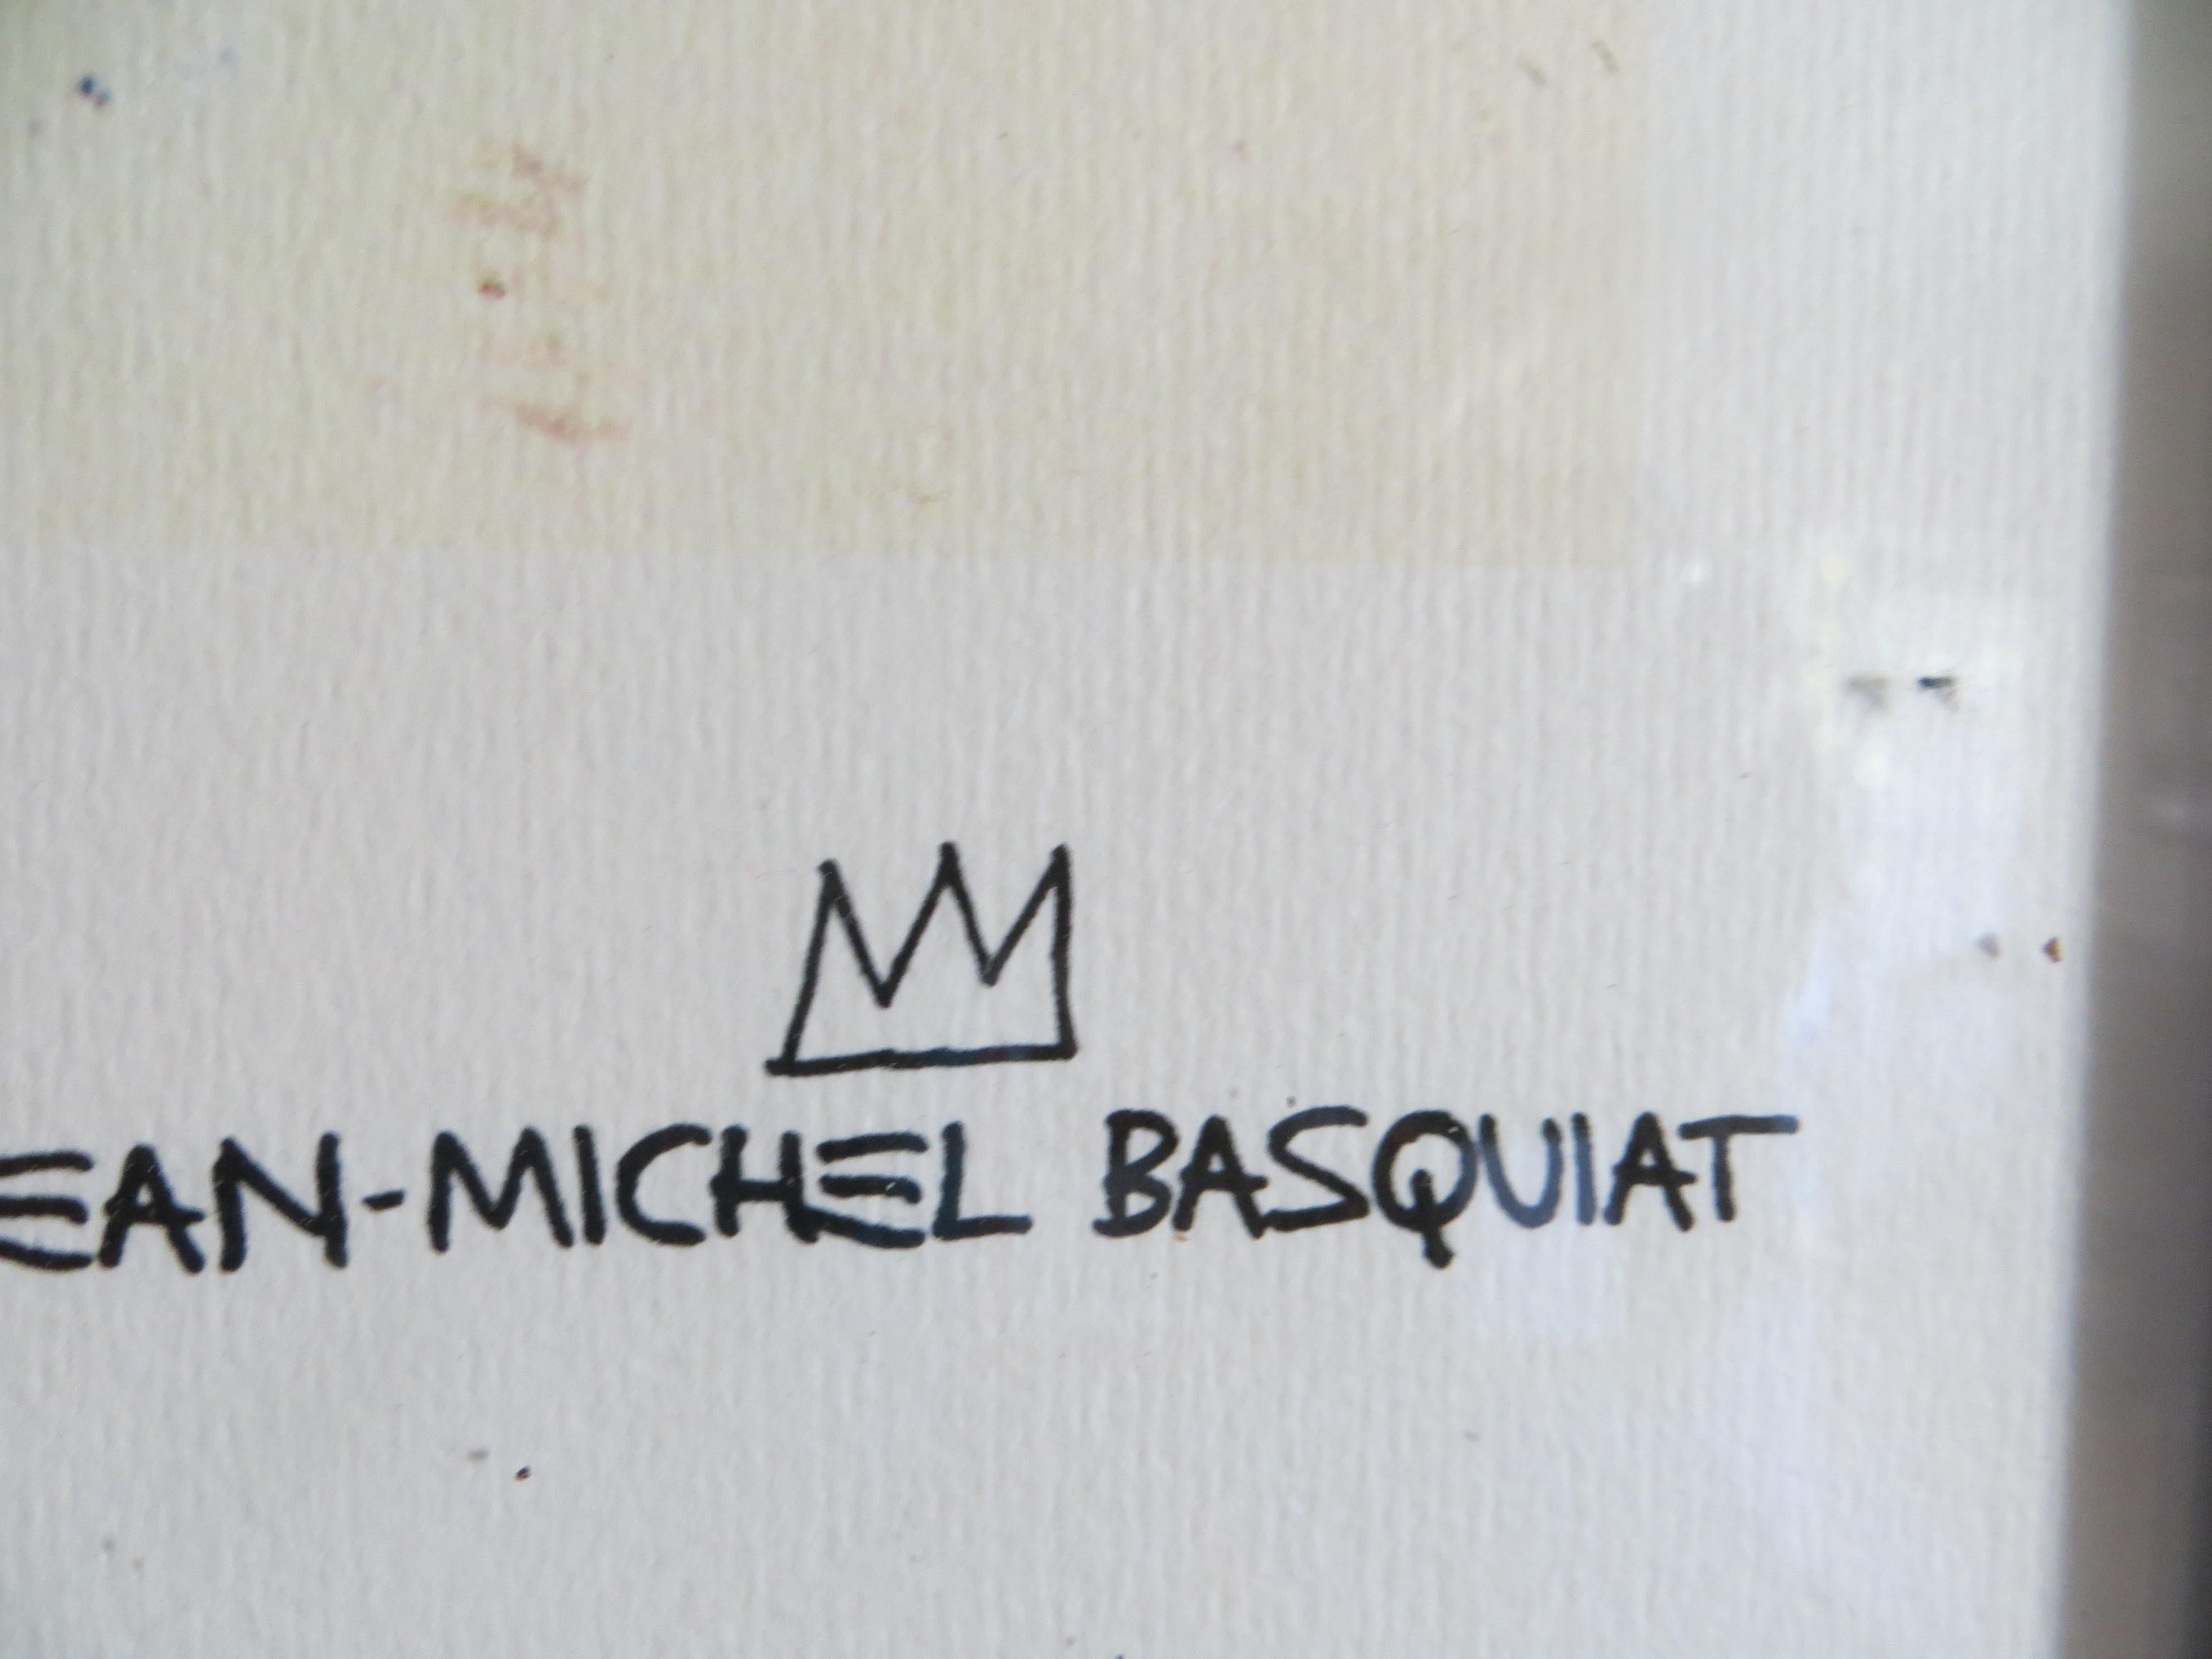 After Jean-Michel Basquiat, Self Portrait Lithograph,  Limited Edition.
Estate of JM Basquiat 2010-2012.
This one is a lithograph signed on the plate and numbered on 57/ 300

Jean Michel Basquiat ( 1960 - 1988 ) was born to two Haitian immigrants in